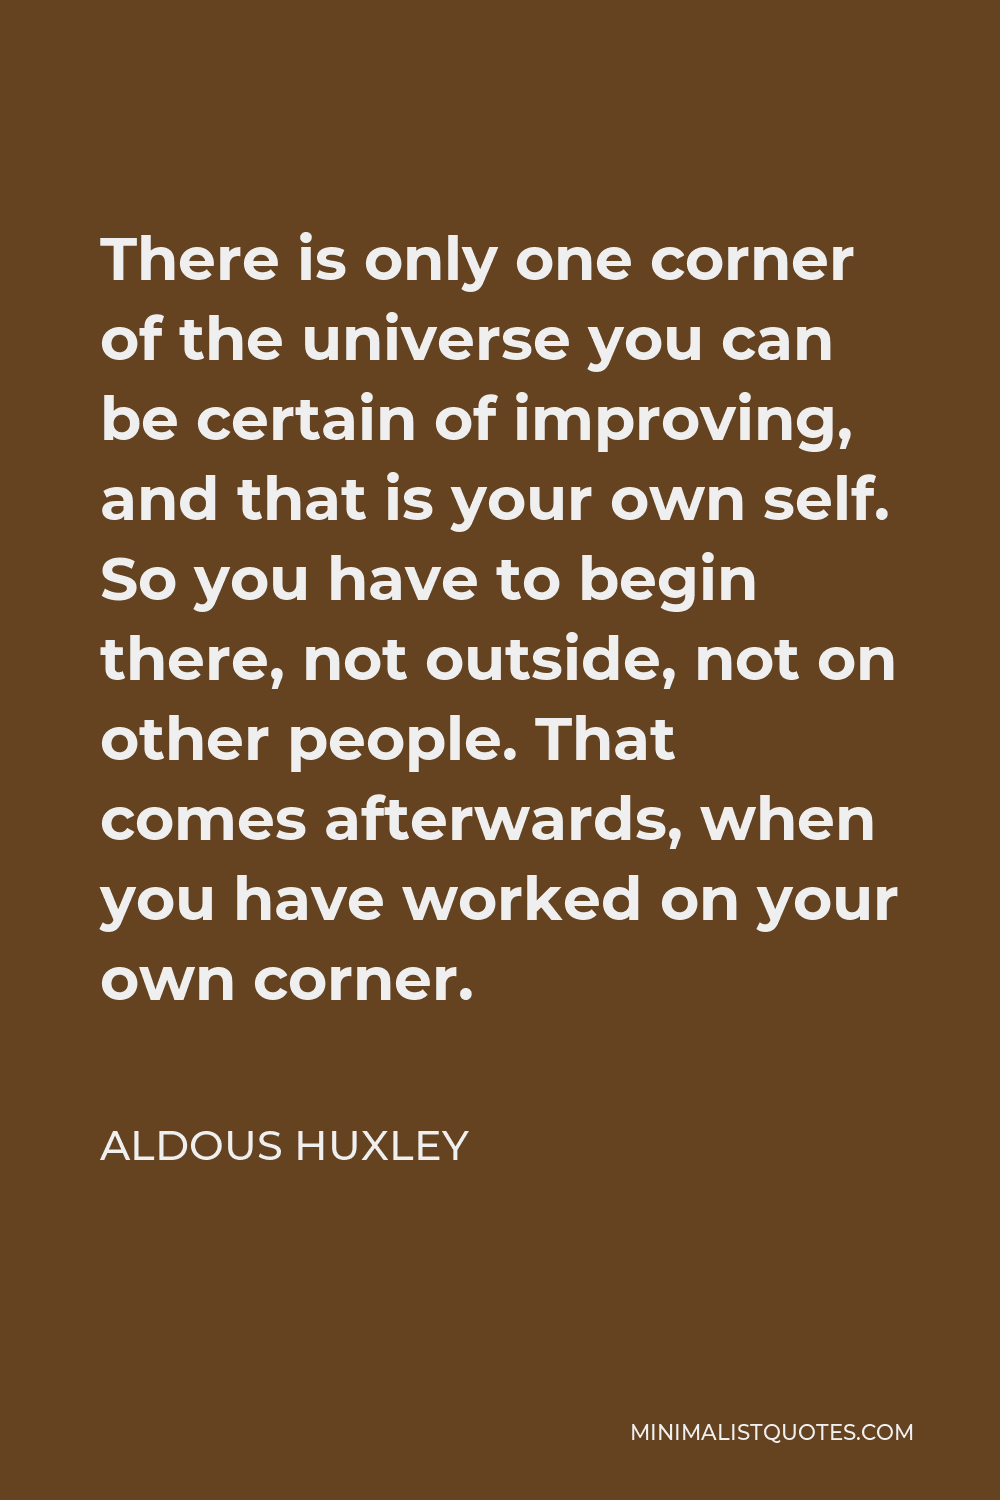 Aldous Huxley Quote - There is only one corner of the universe you can be certain of improving, and that’s your own self.